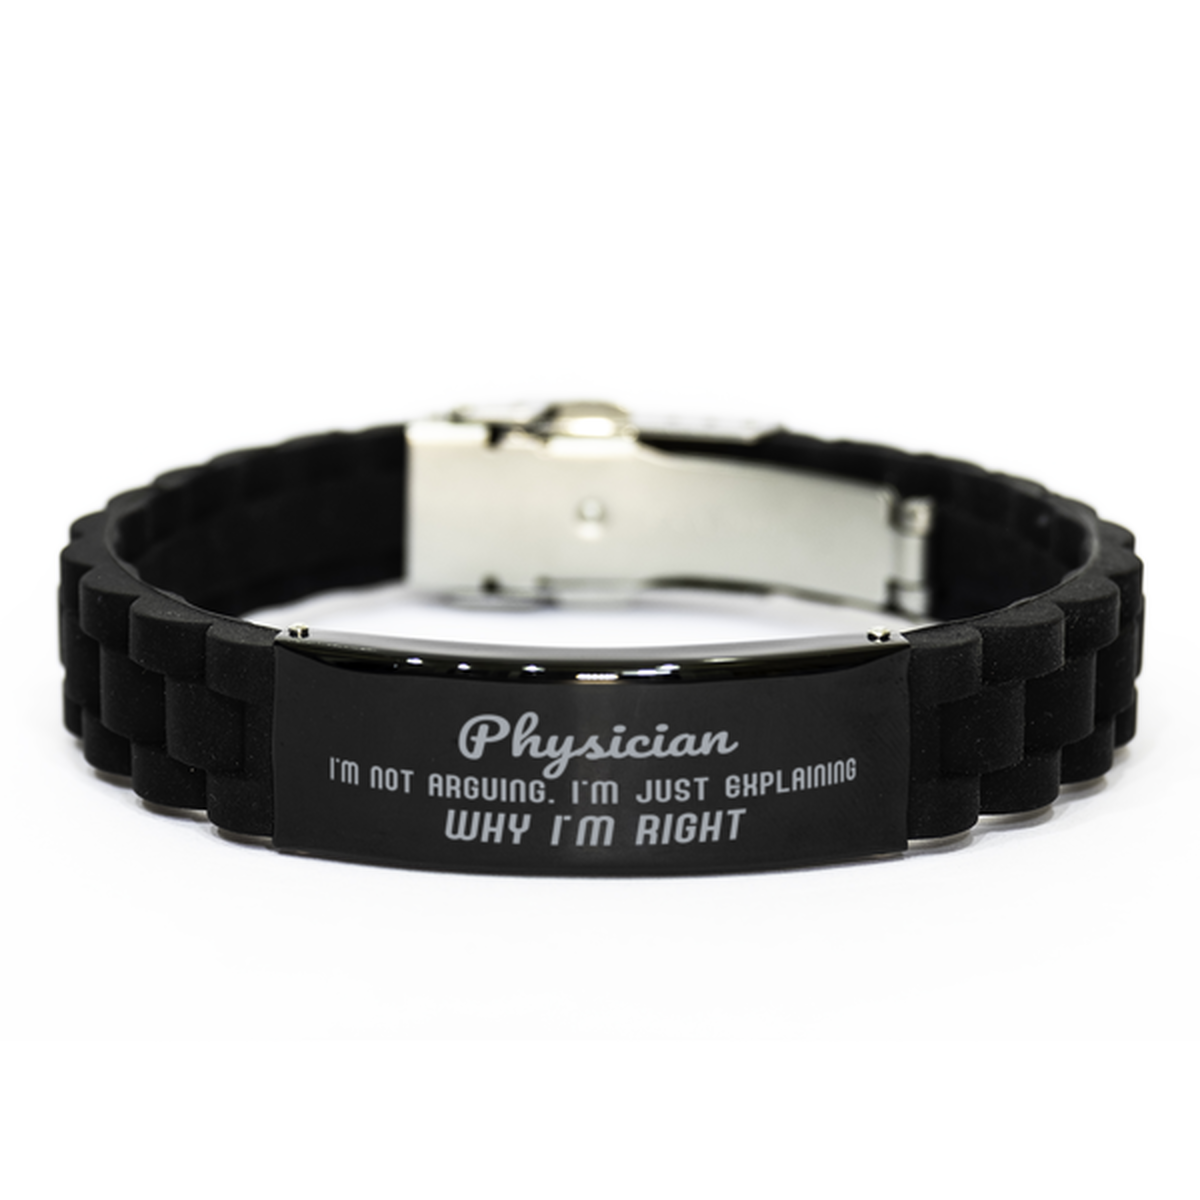 Physician I'm not Arguing. I'm Just Explaining Why I'm RIGHT Black Glidelock Clasp Bracelet, Funny Saying Quote Physician Gifts For Physician Graduation Birthday Christmas Gifts for Men Women Coworker